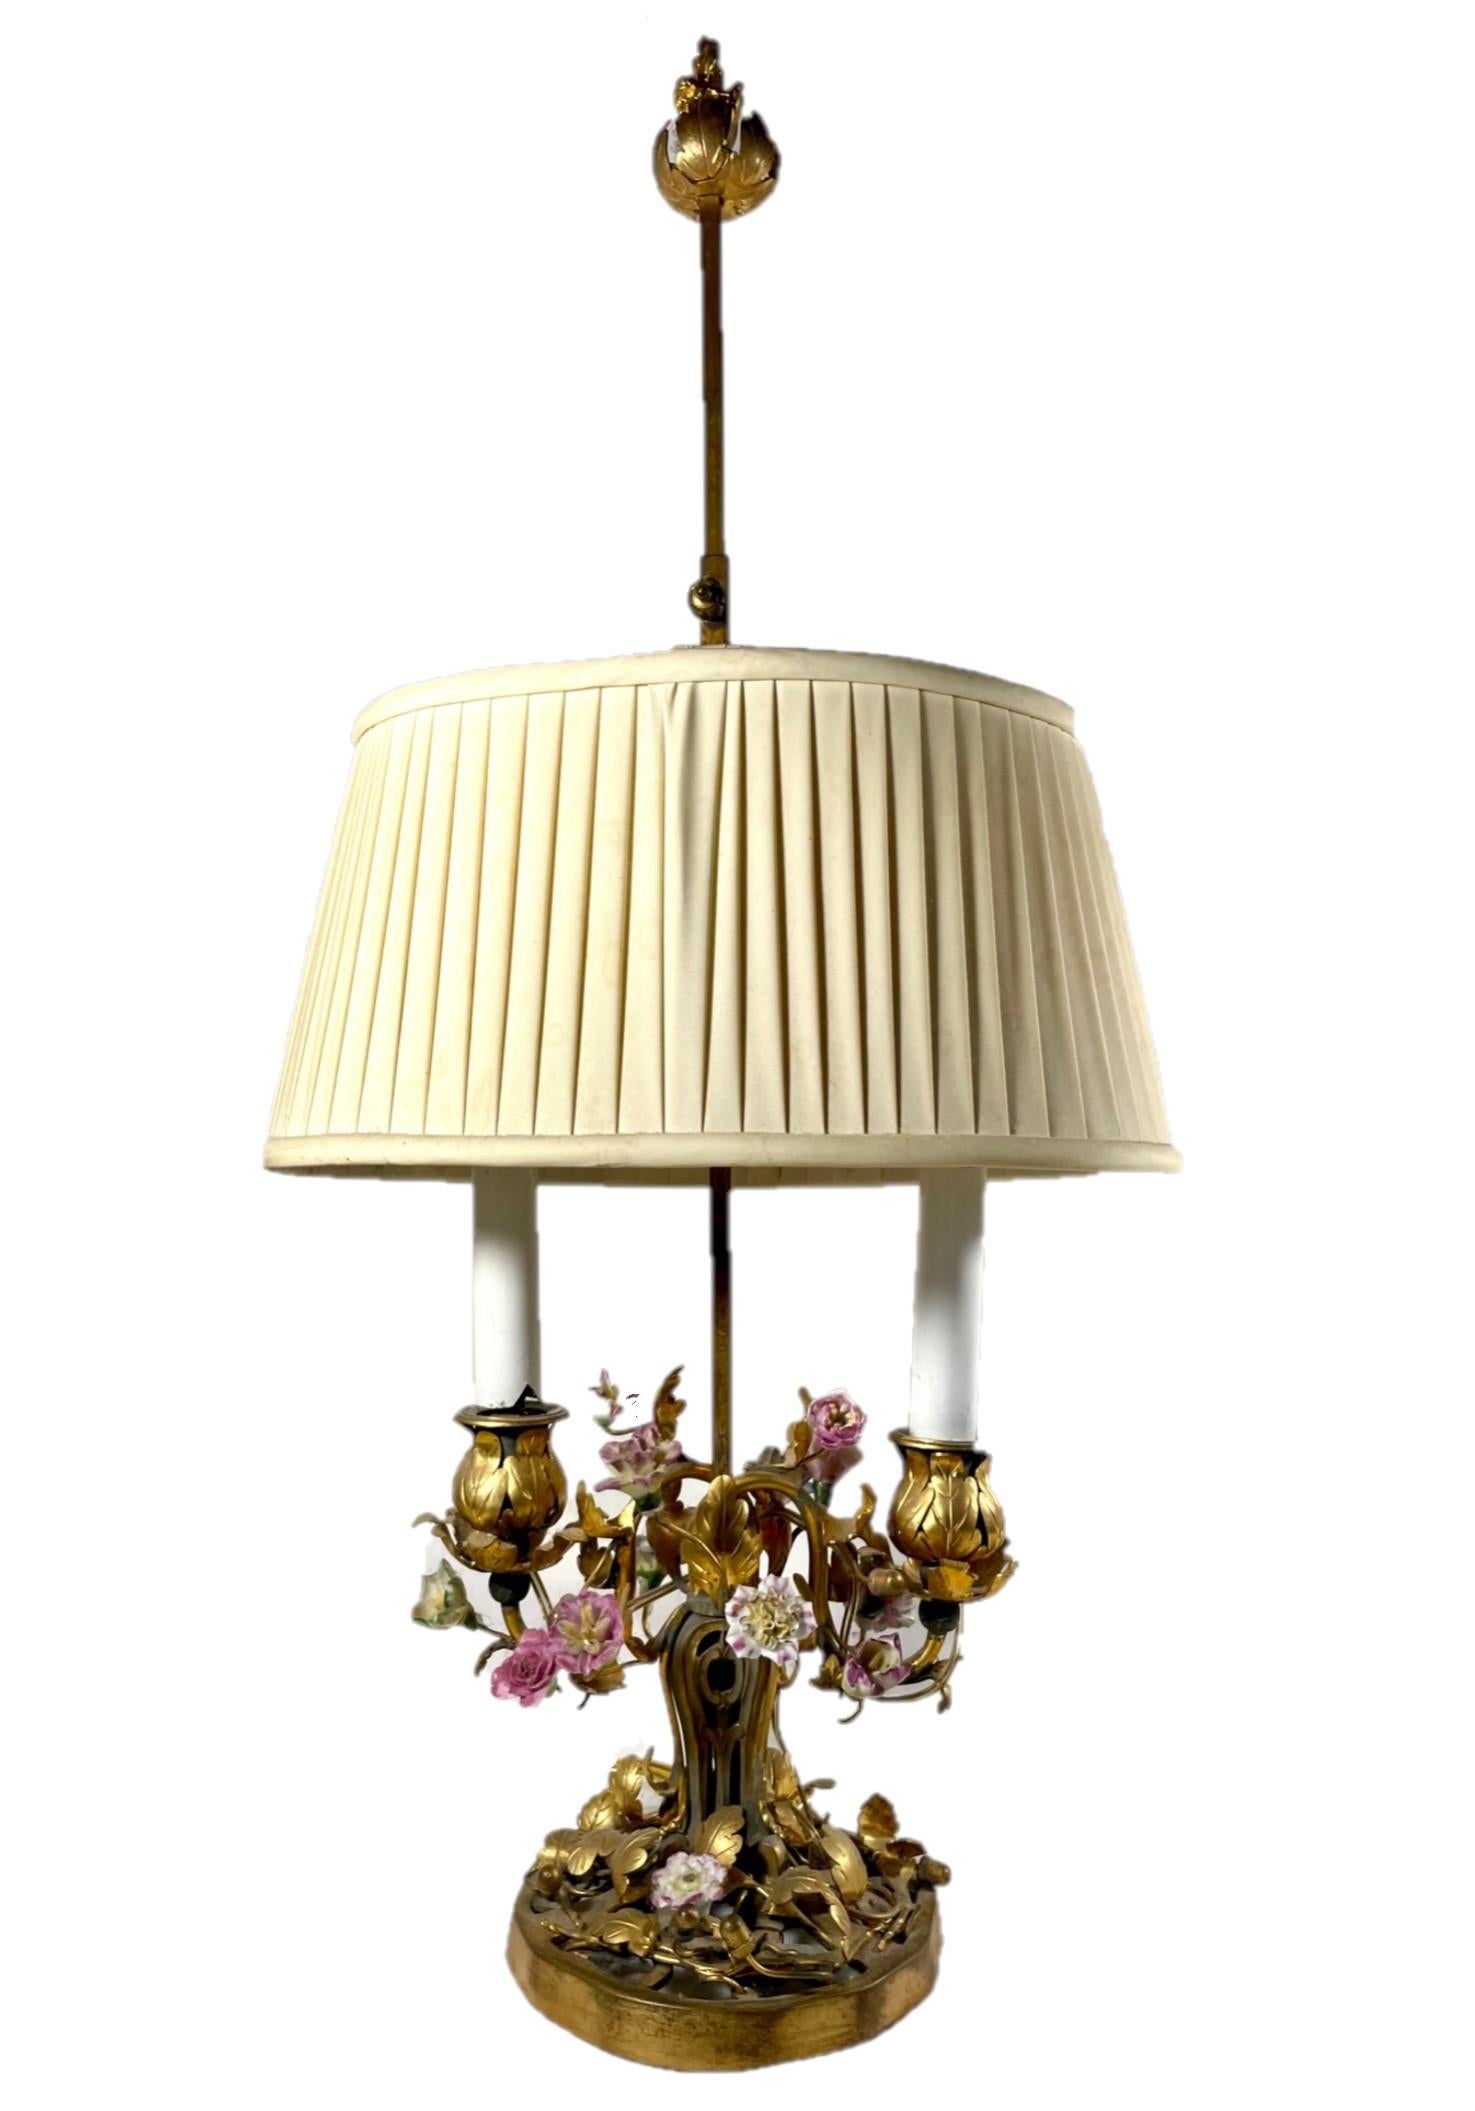 French Louis XV style ormolu mounted porcelain and tole two-light table lamp.

Antique 19th century ormolu and tole two-light table lamp decorated with Saxon 18th and 19th century porcelain flowers. This type of charming lamp is representative of